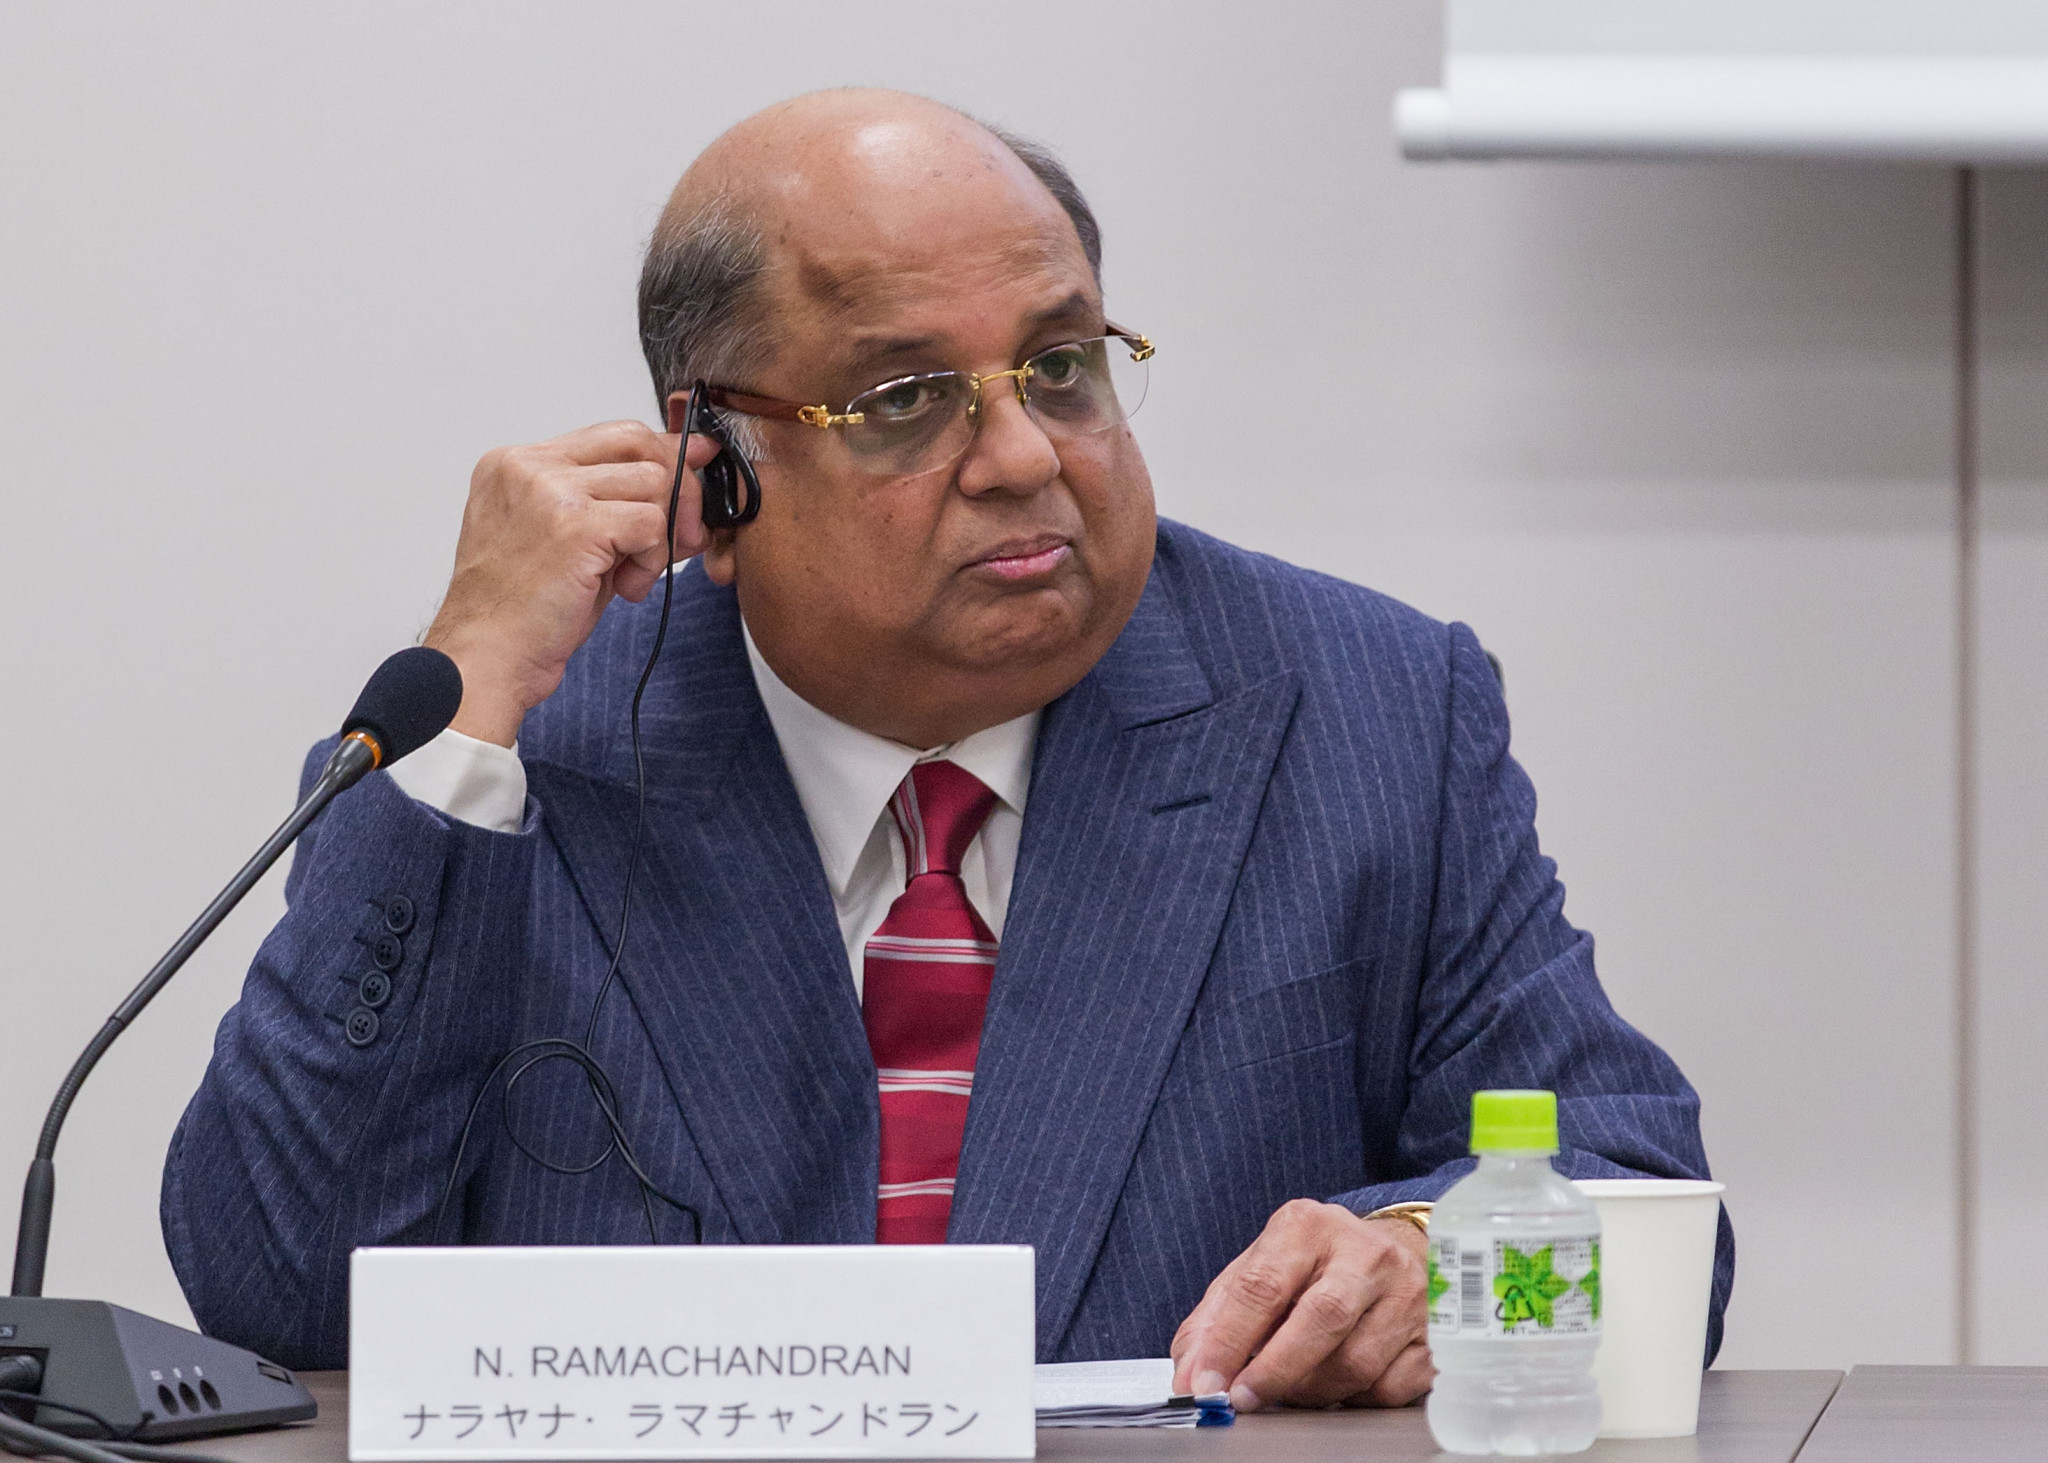 N Ramachandran decided not to run for a second term as IOA President ©Getty Images